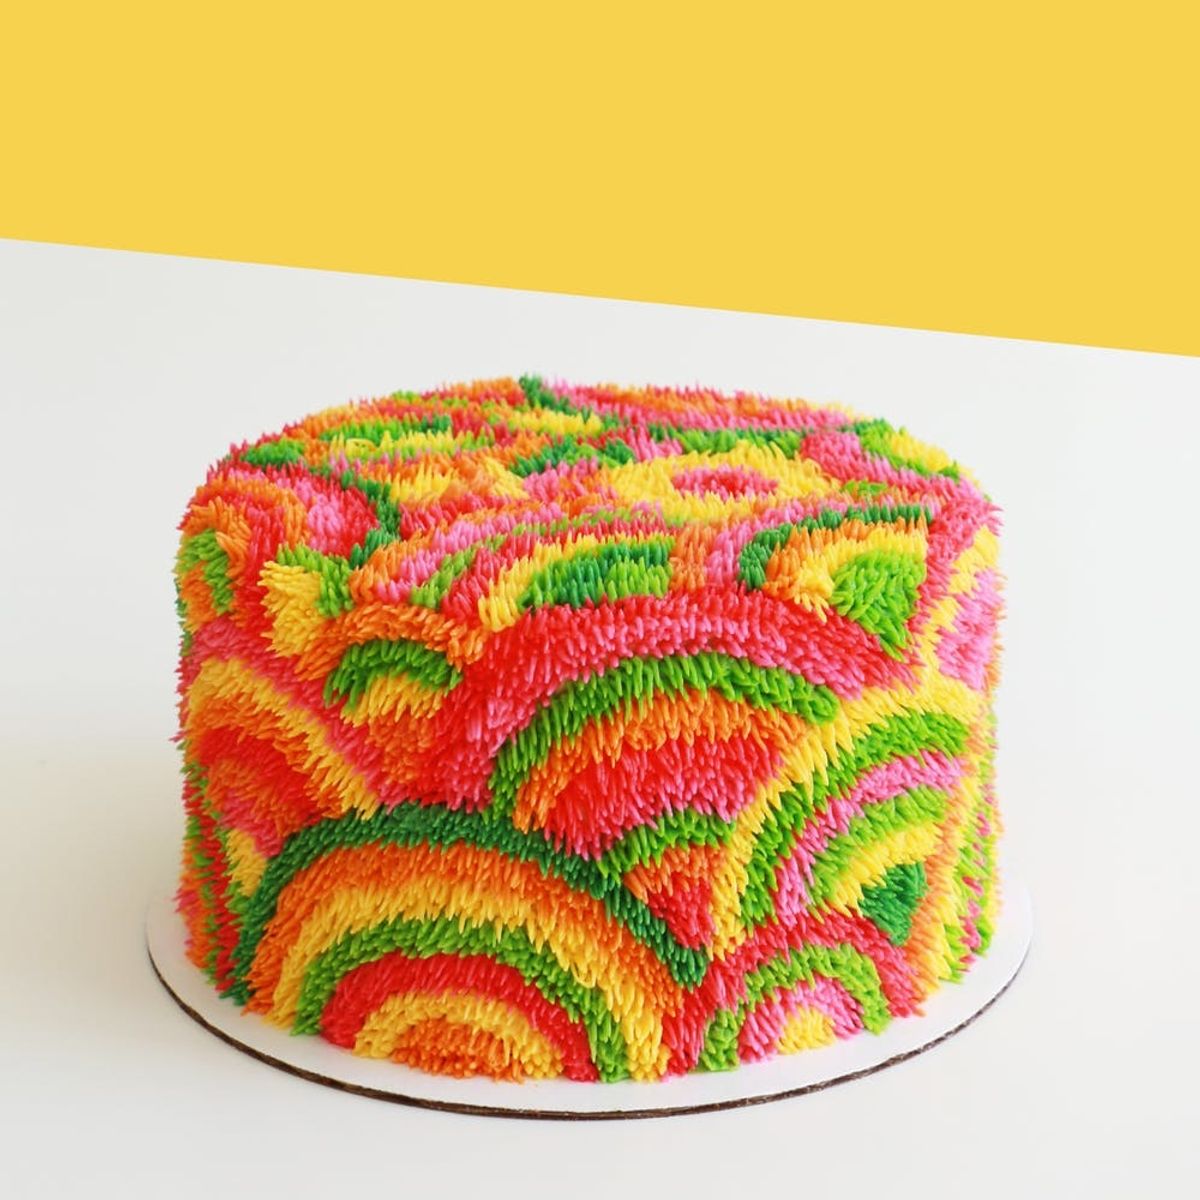 These ’70s-Inspired Shag Cakes Are a Technicolor Dream